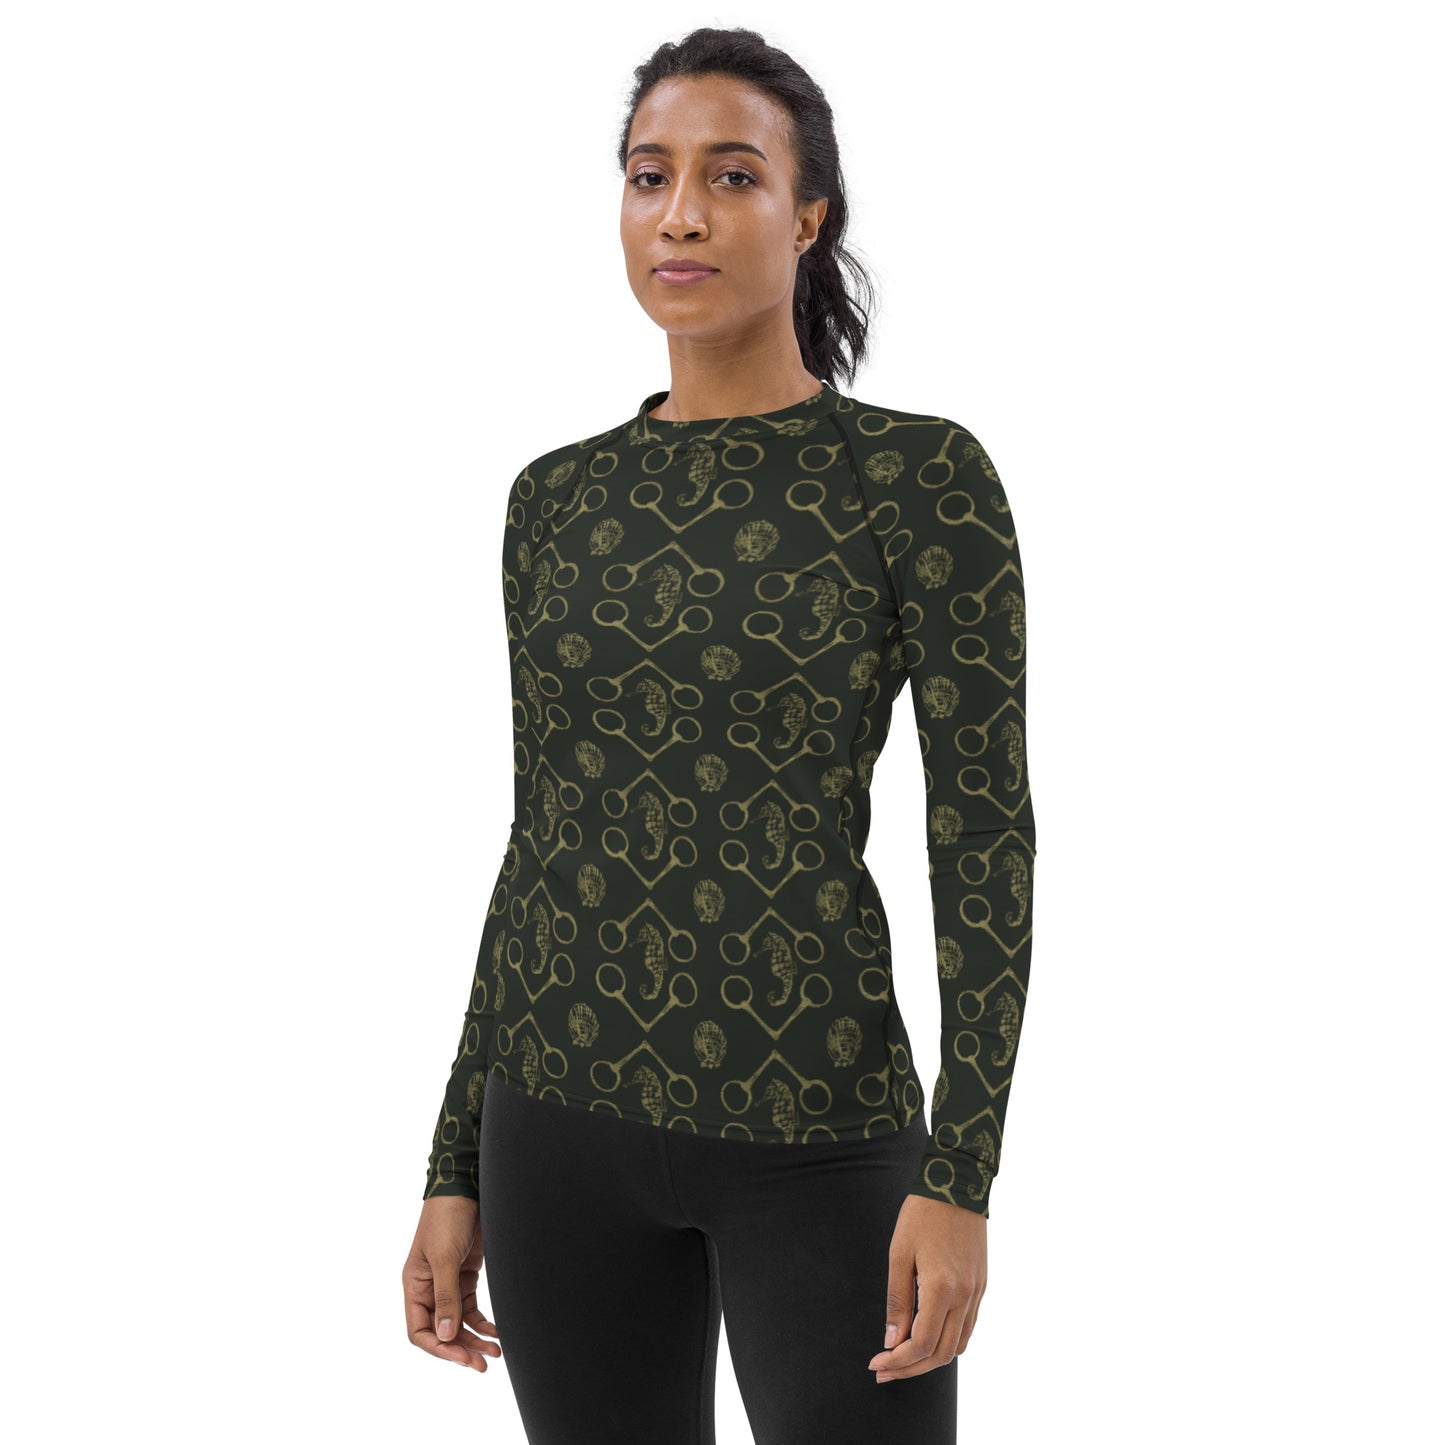 Sea horse and bits - Olive and gold Women's Rash Guard